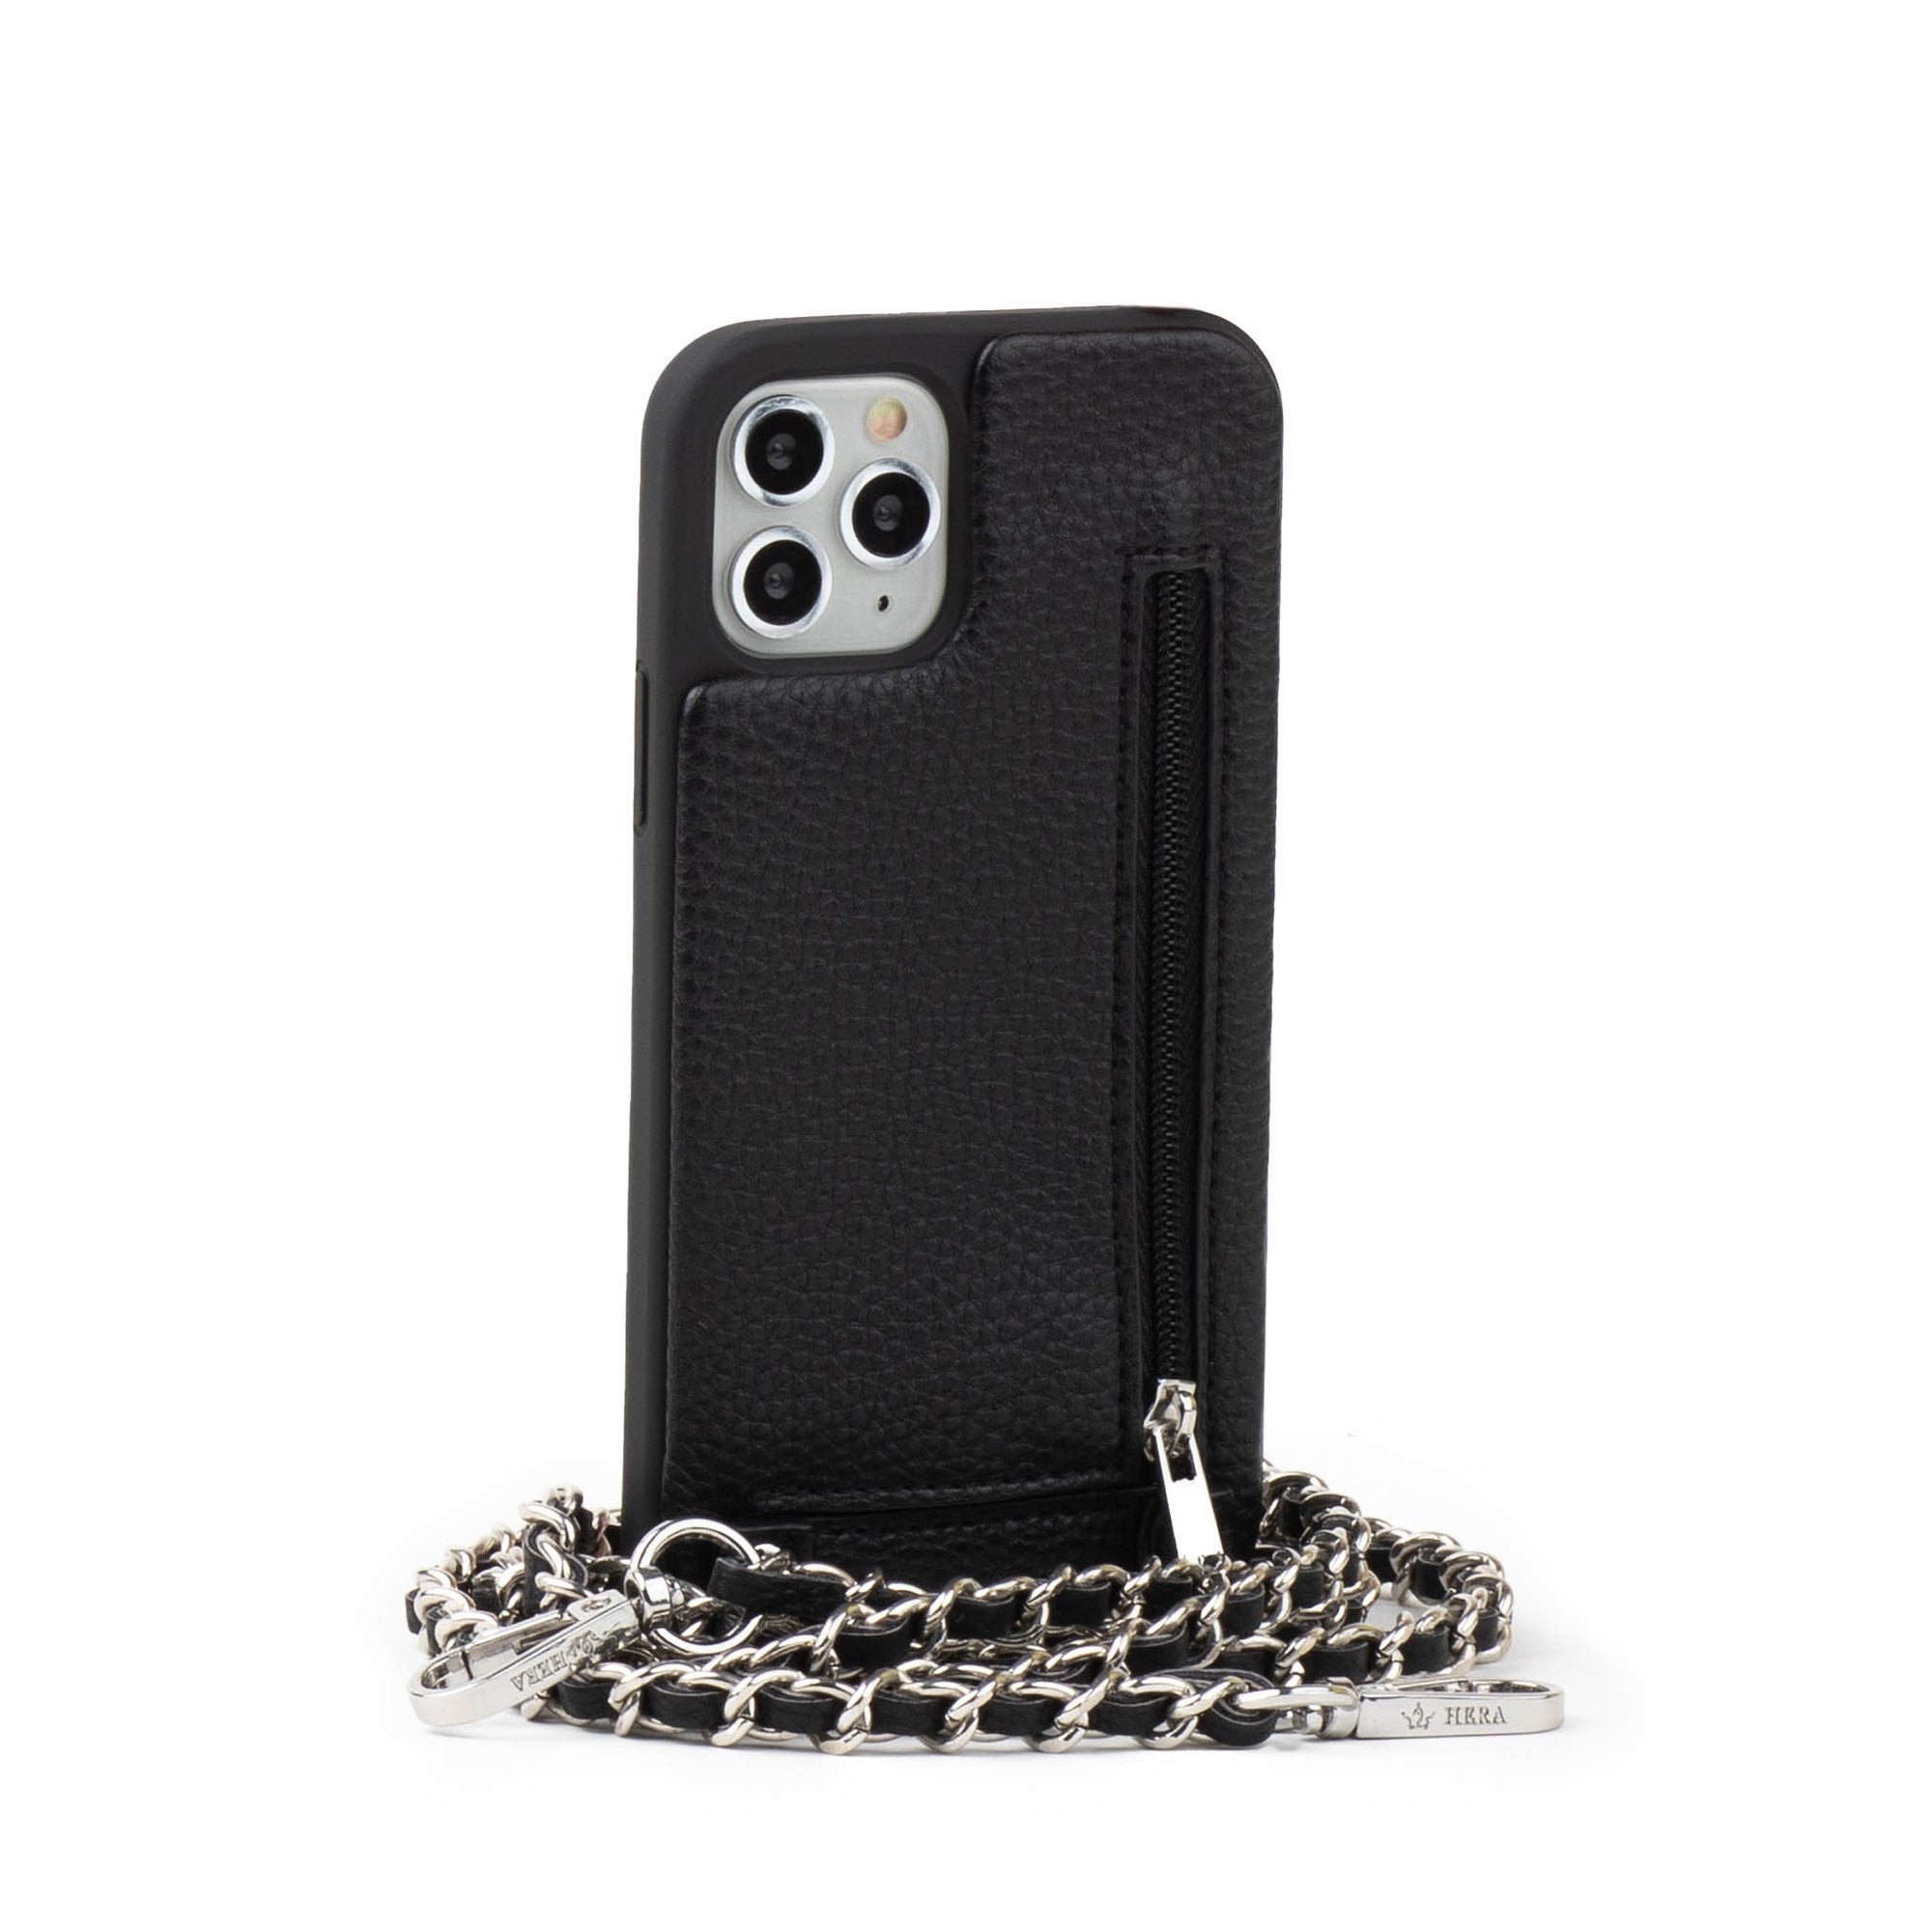 VICTORIA Crossbody Wallet Case for iPhone 7/8 Plus with Chain